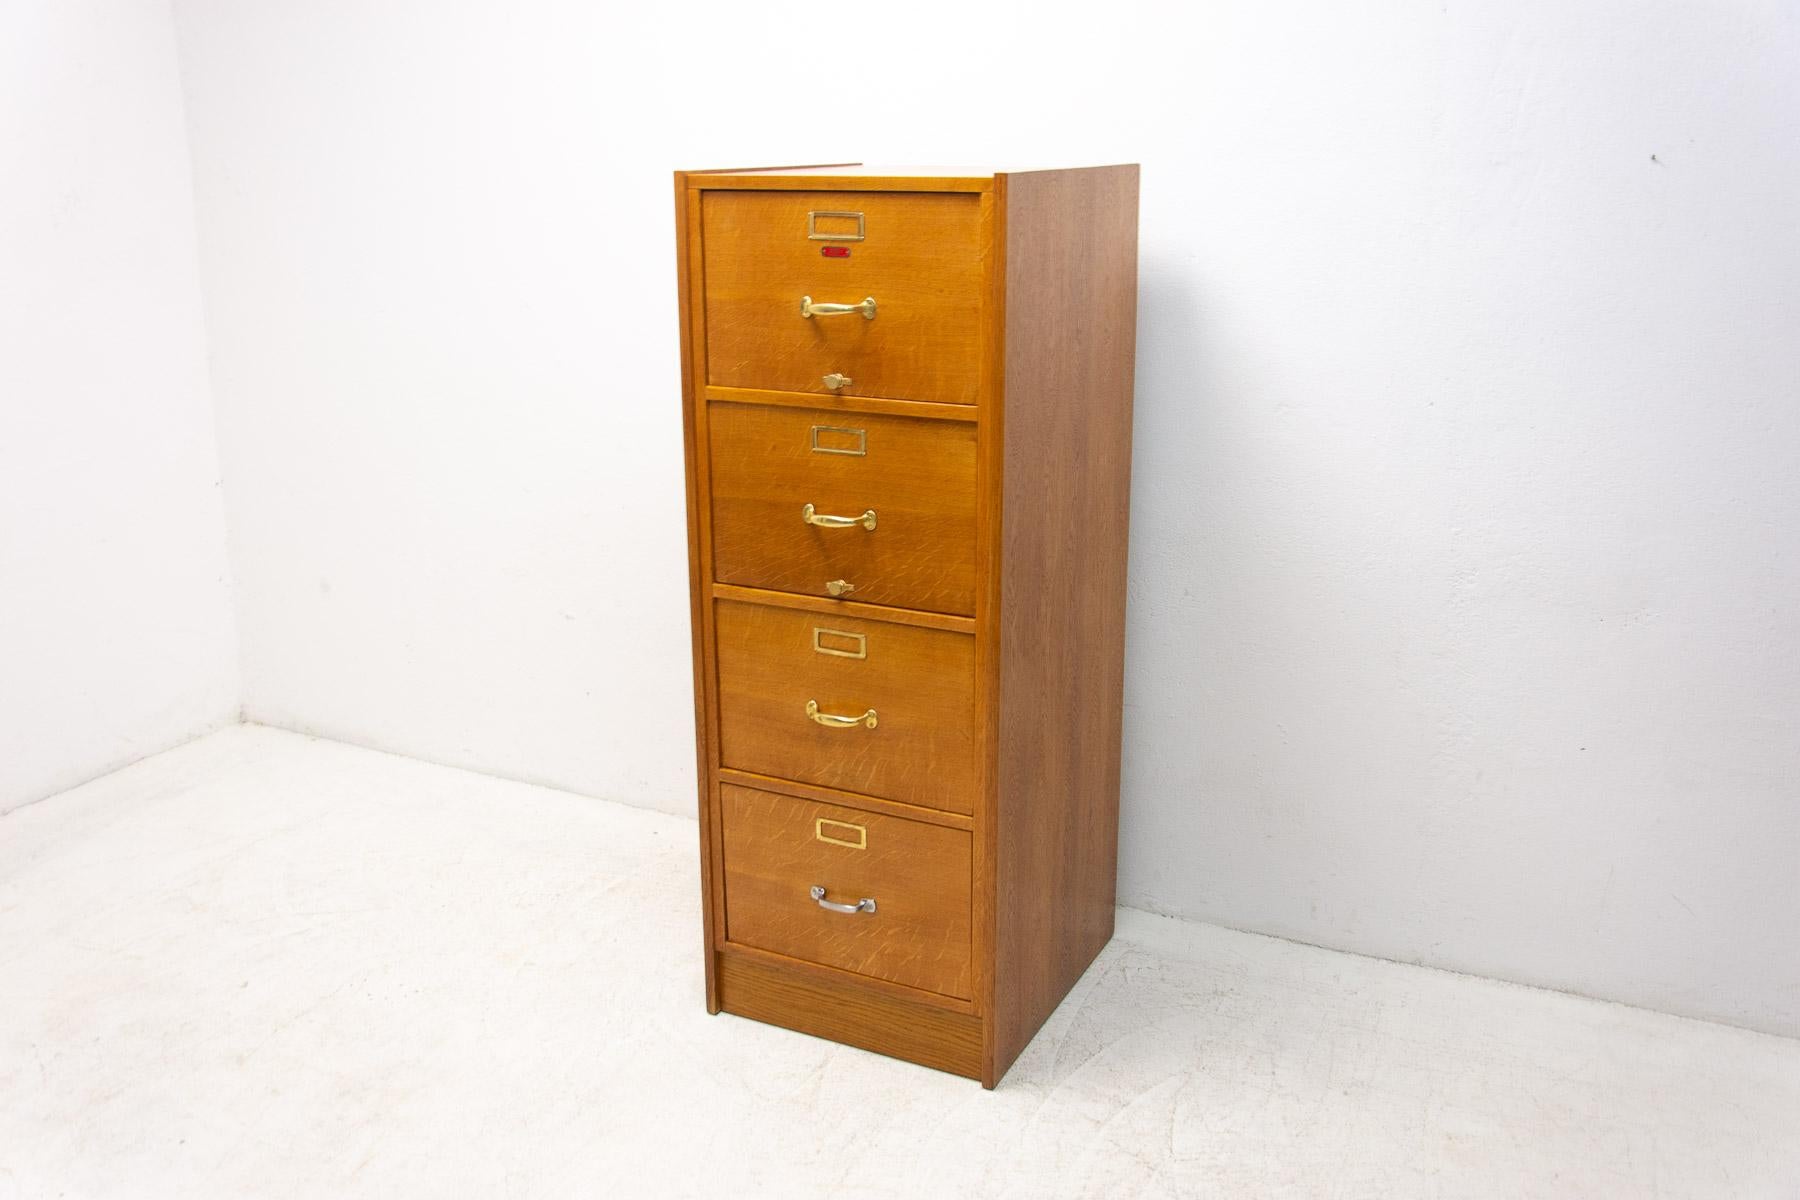 Functionalist Industrial filing cabinet, 1930s. Made in former Czechoslovakia.

 Material oak wood, plywood, general metal. In excellent condition after renovation.

Measures: Height: 147 cm

Lenght: 56 cm

Depth: 60 cm.